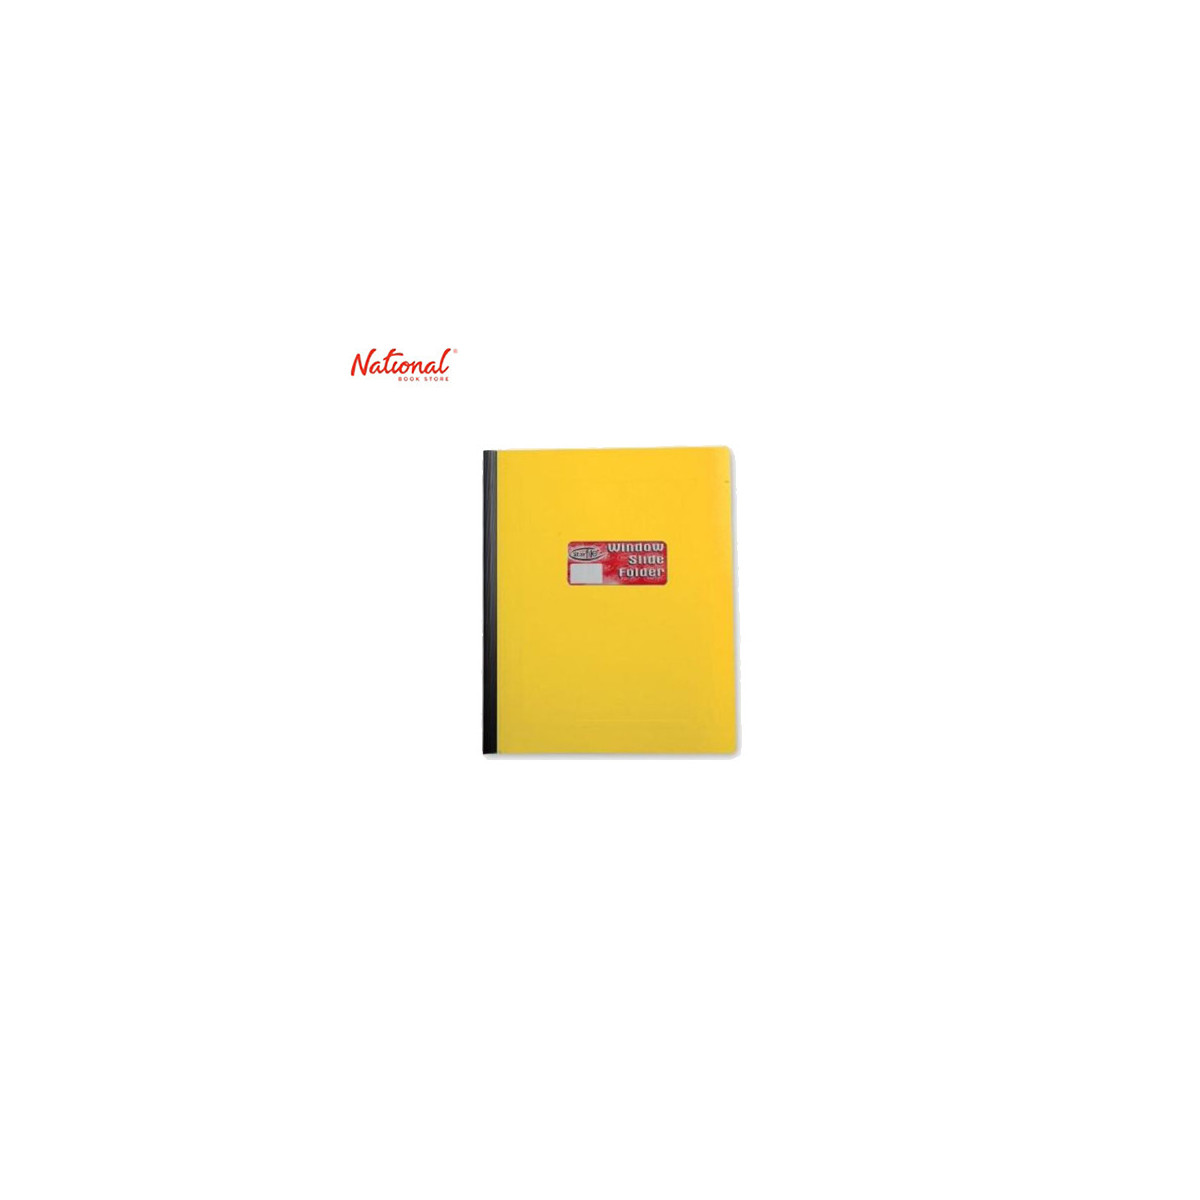 STARFILE Folder Report Cover with Slide Short Deep with Window Yellow